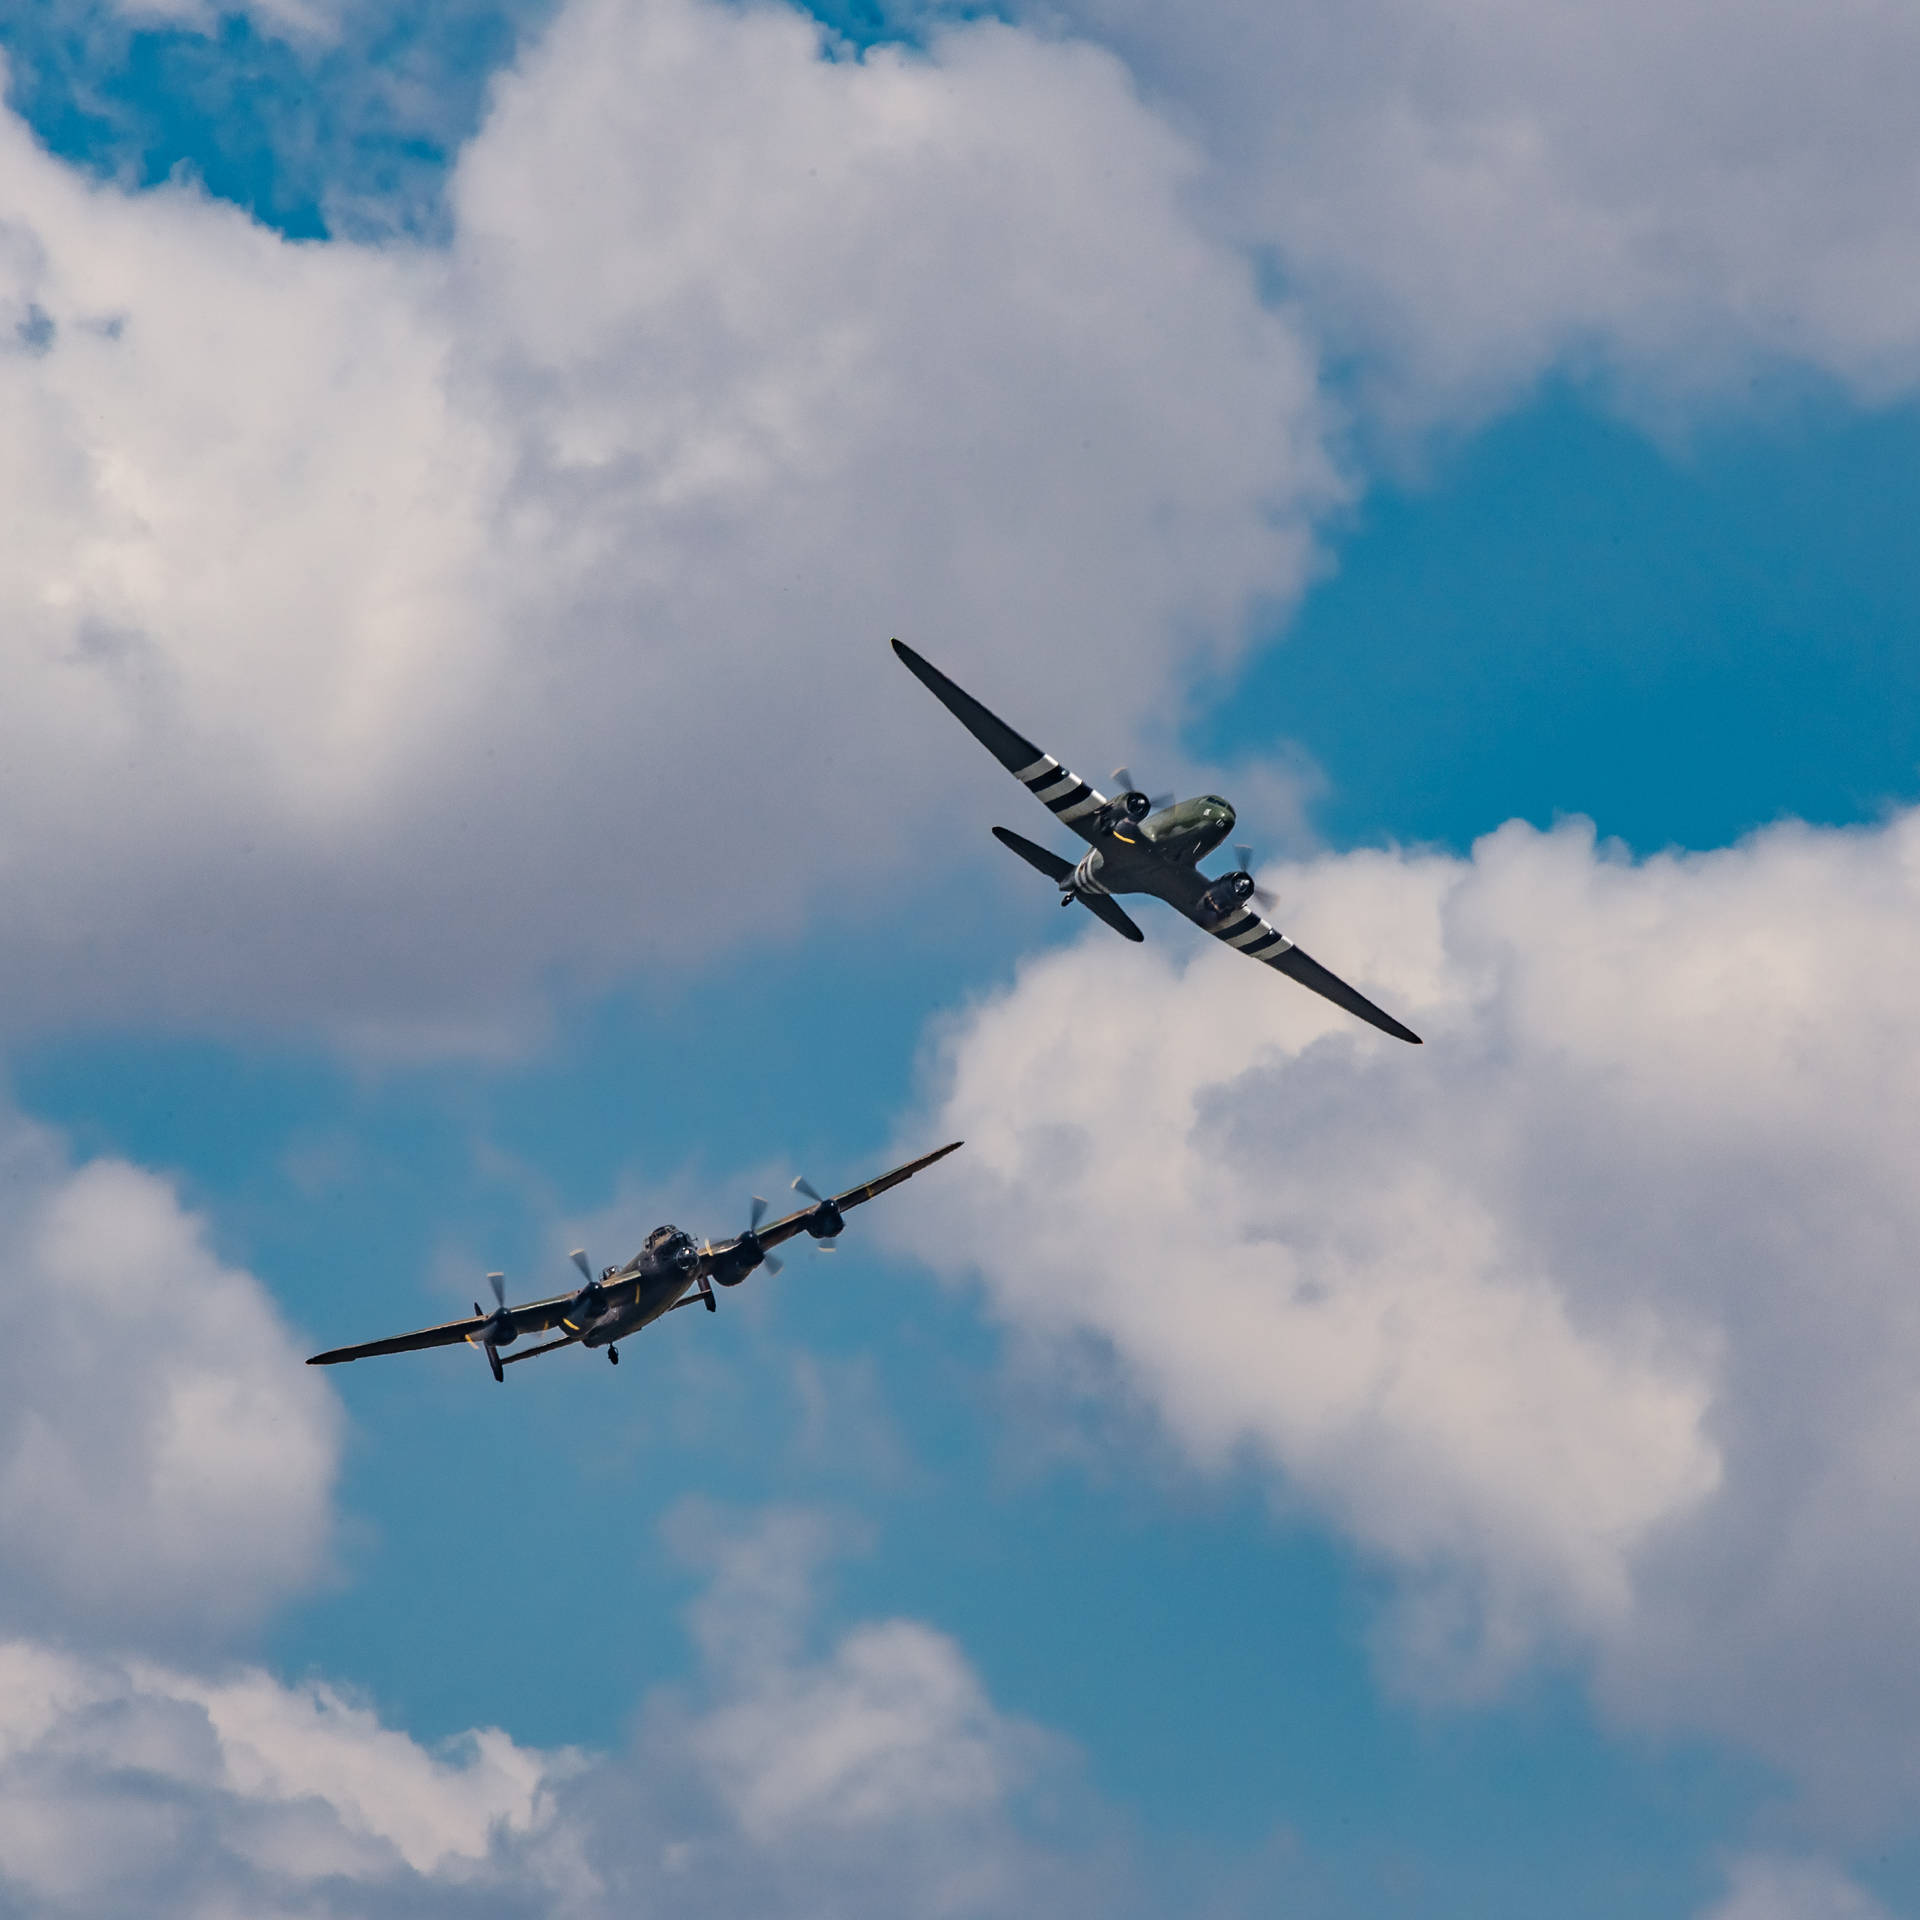 Two Fighter Planes In The Sky Wallpaper